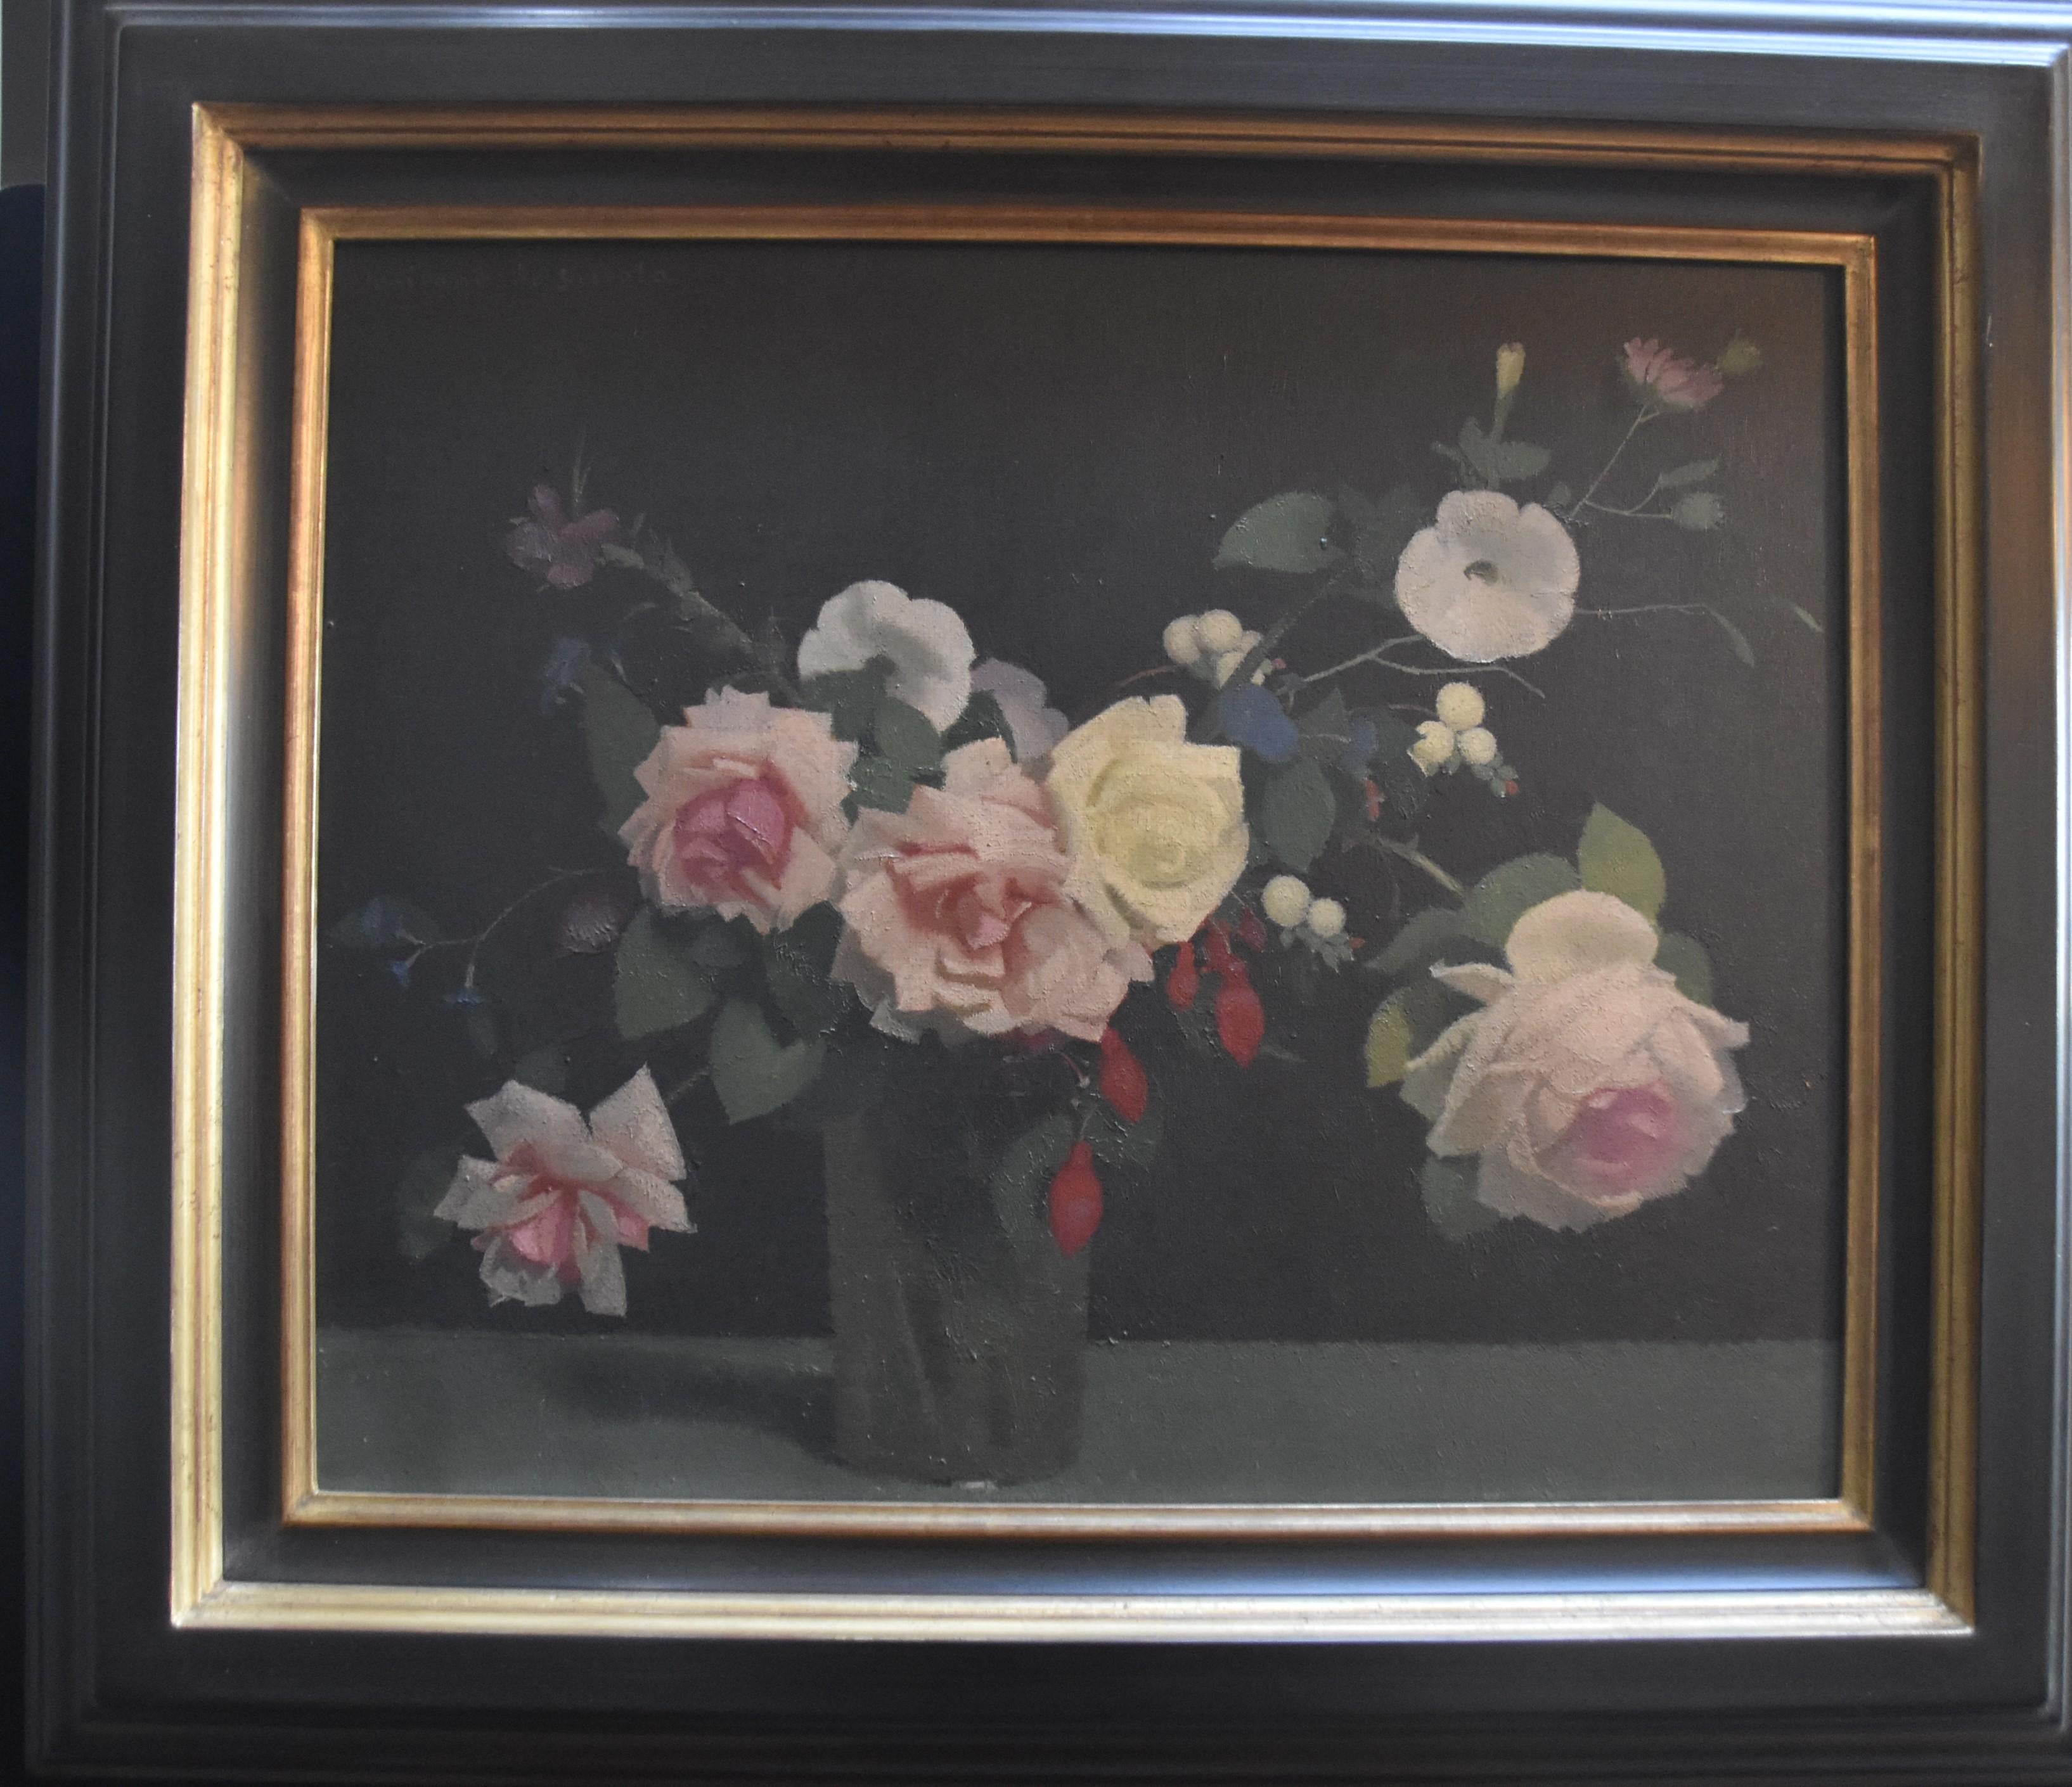  Lucien Victor Guirand de Scevola  (1871-1950) A bunch of flowers, oil on canvas - Black Still-Life Painting by Lucien-Victor Guirand de Scévola